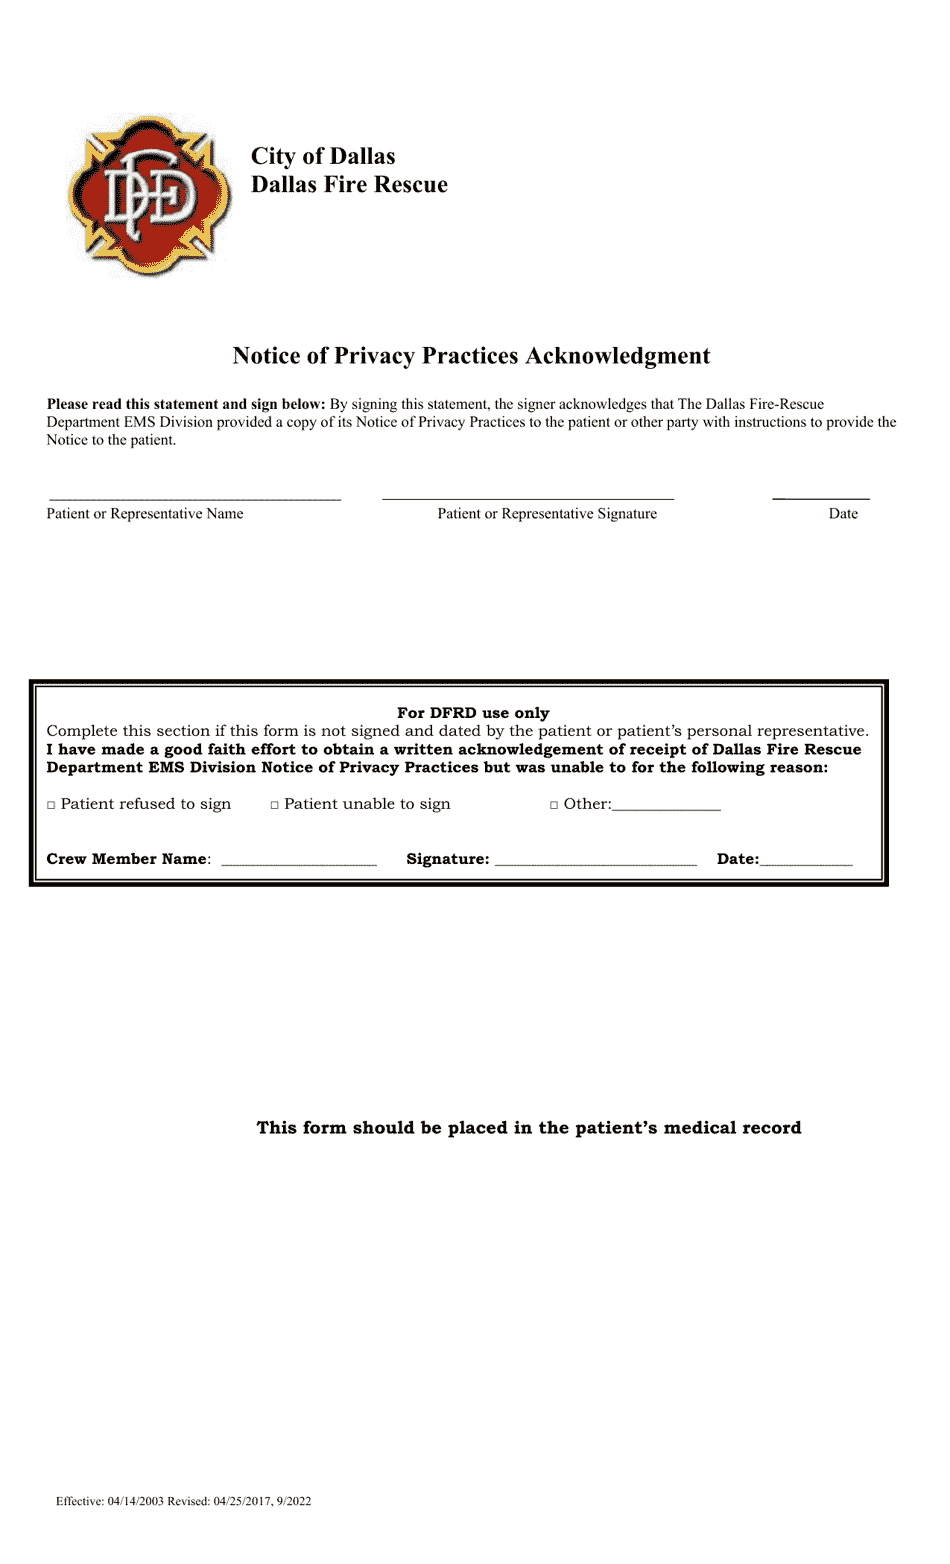 Notice of Privacy Practices Acknowledgment - City of Dallas, Texas, Page 1